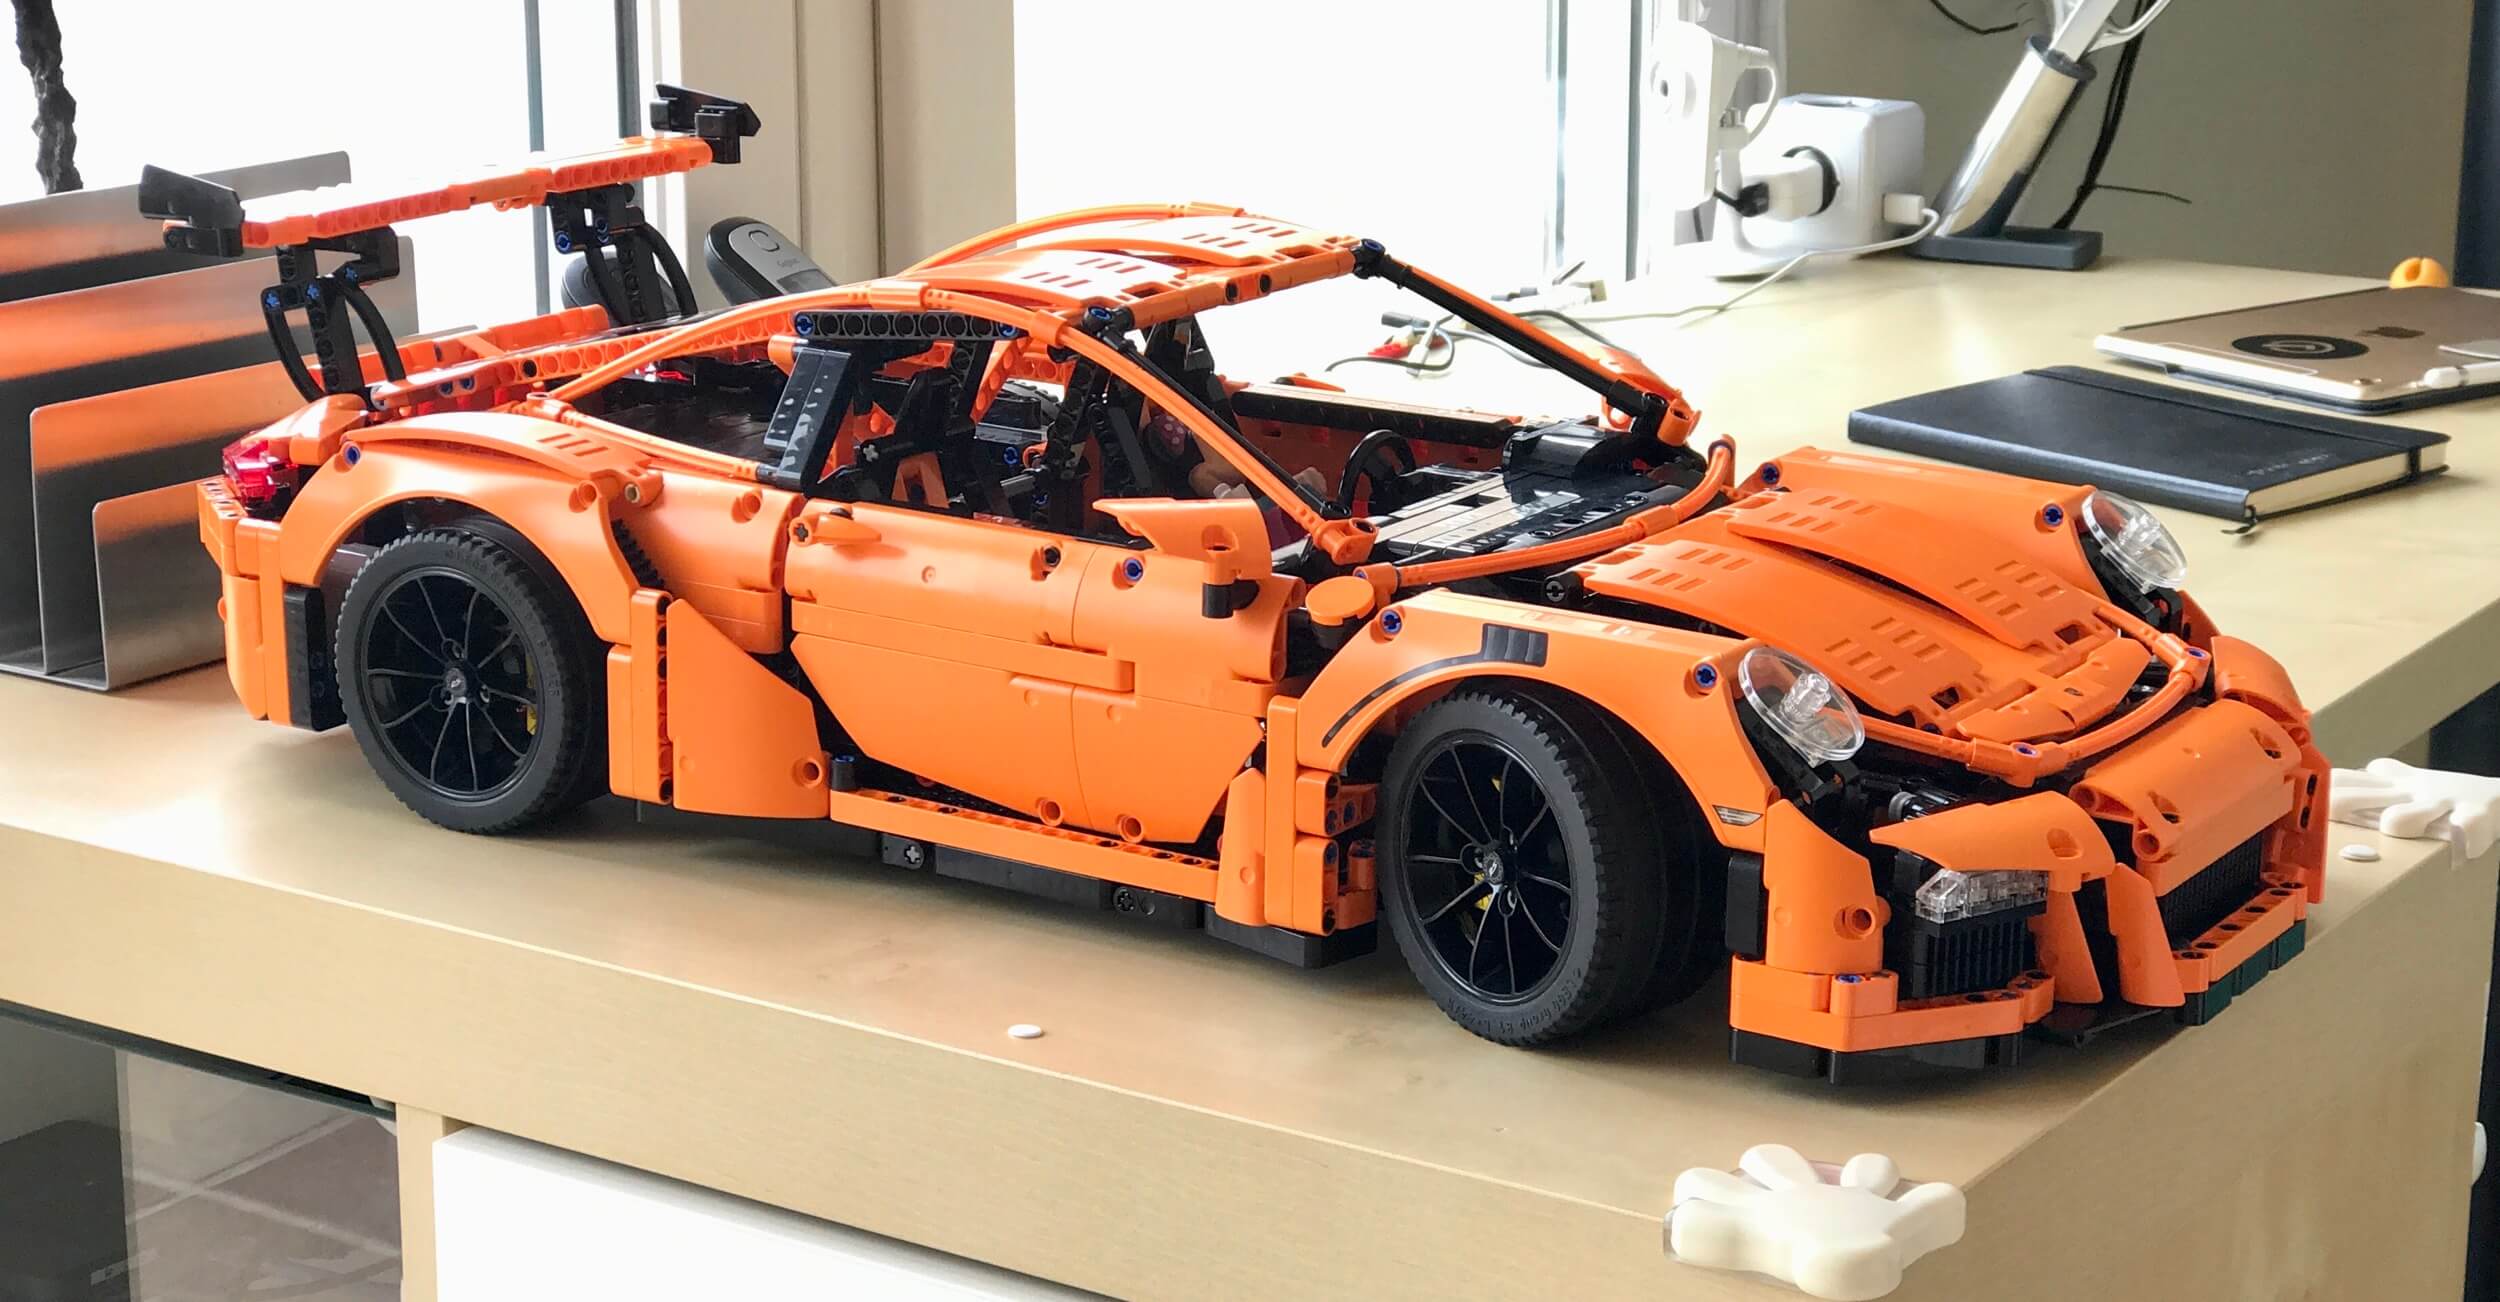 Porsche 911 GT3 RS - why building Lego sets is so much fun!